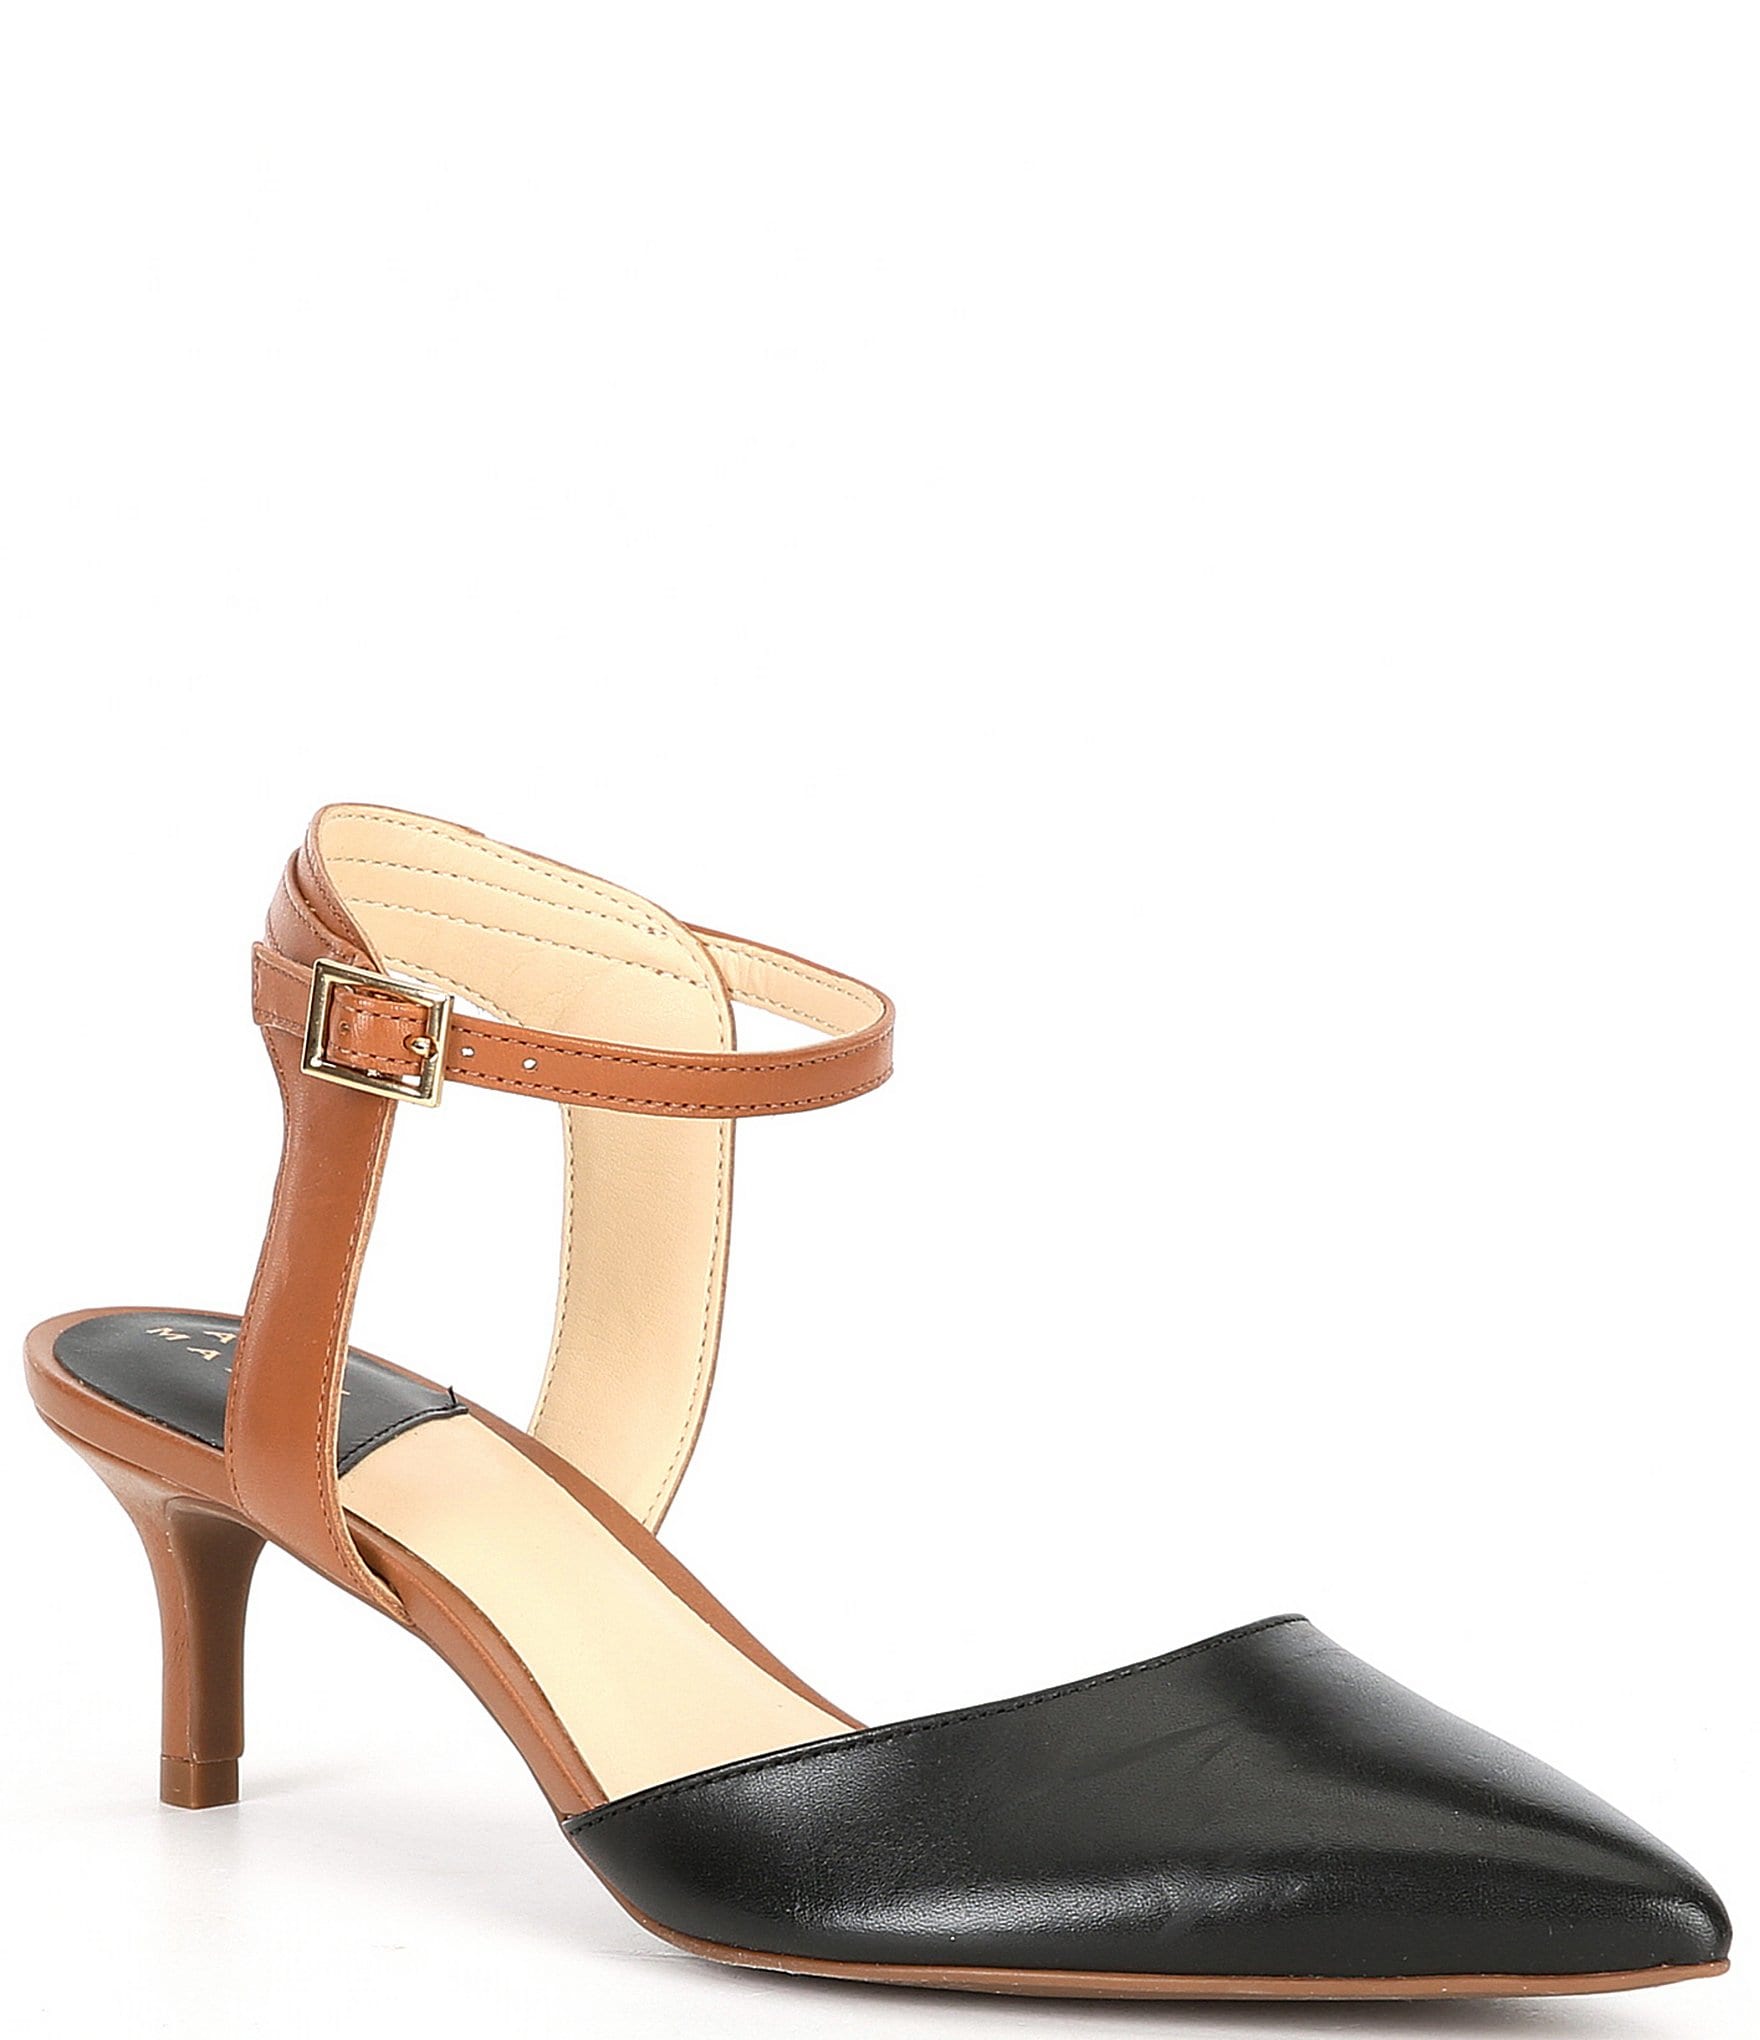 Louise et Cie Leather Strappy Heeled Sandals - Leeba 